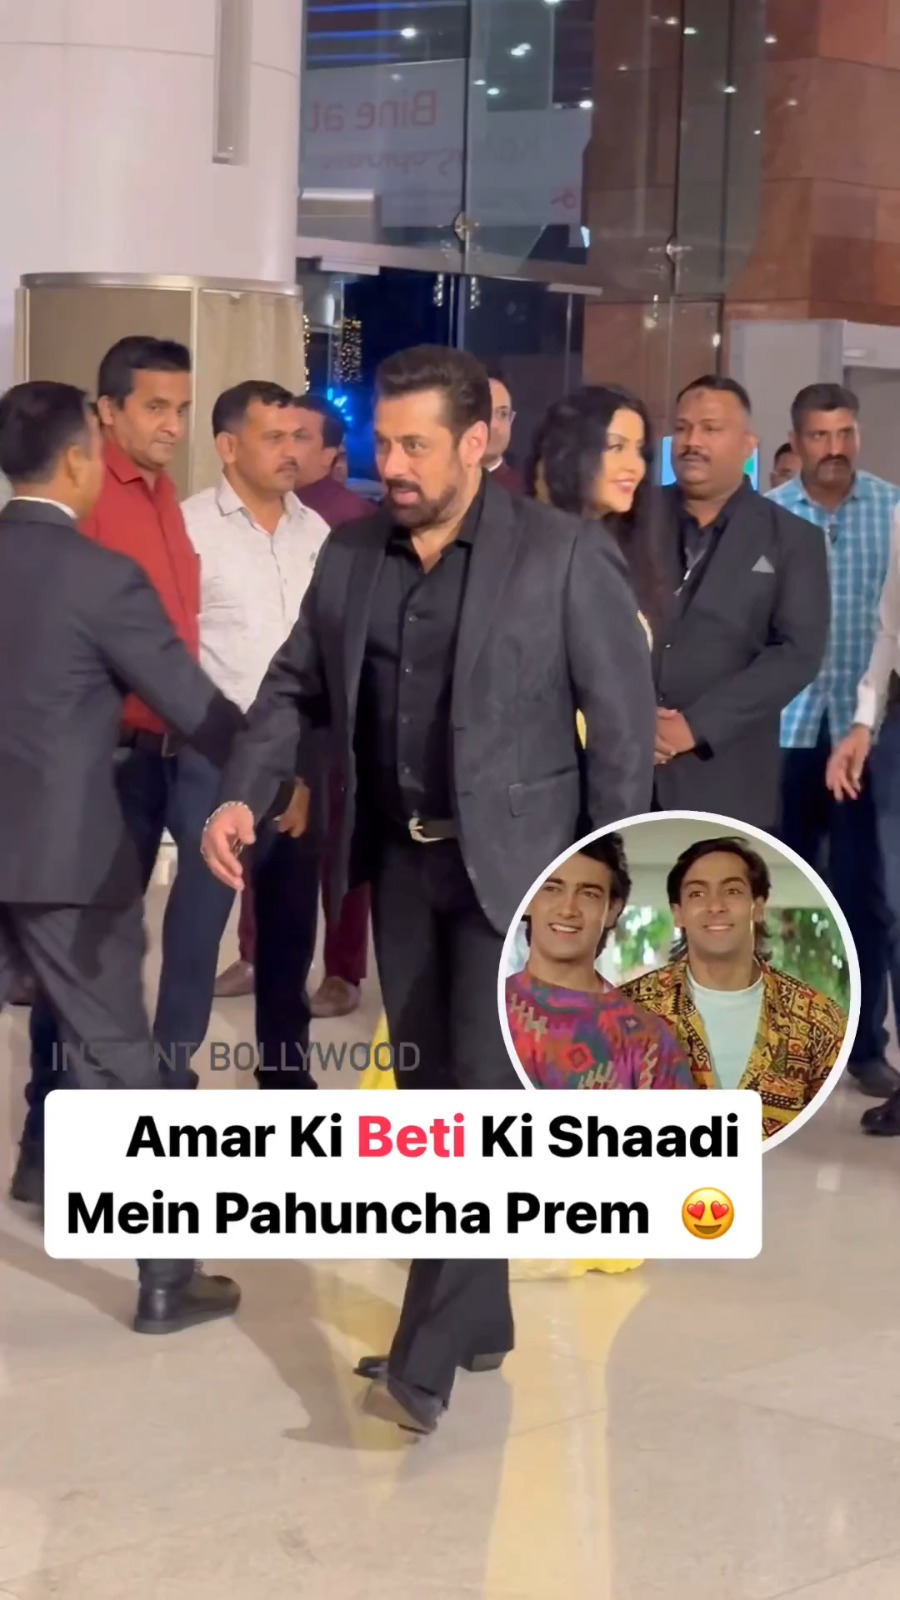 Bhai is here for his Friend’s Daughter’s Wedding Reception ❤️